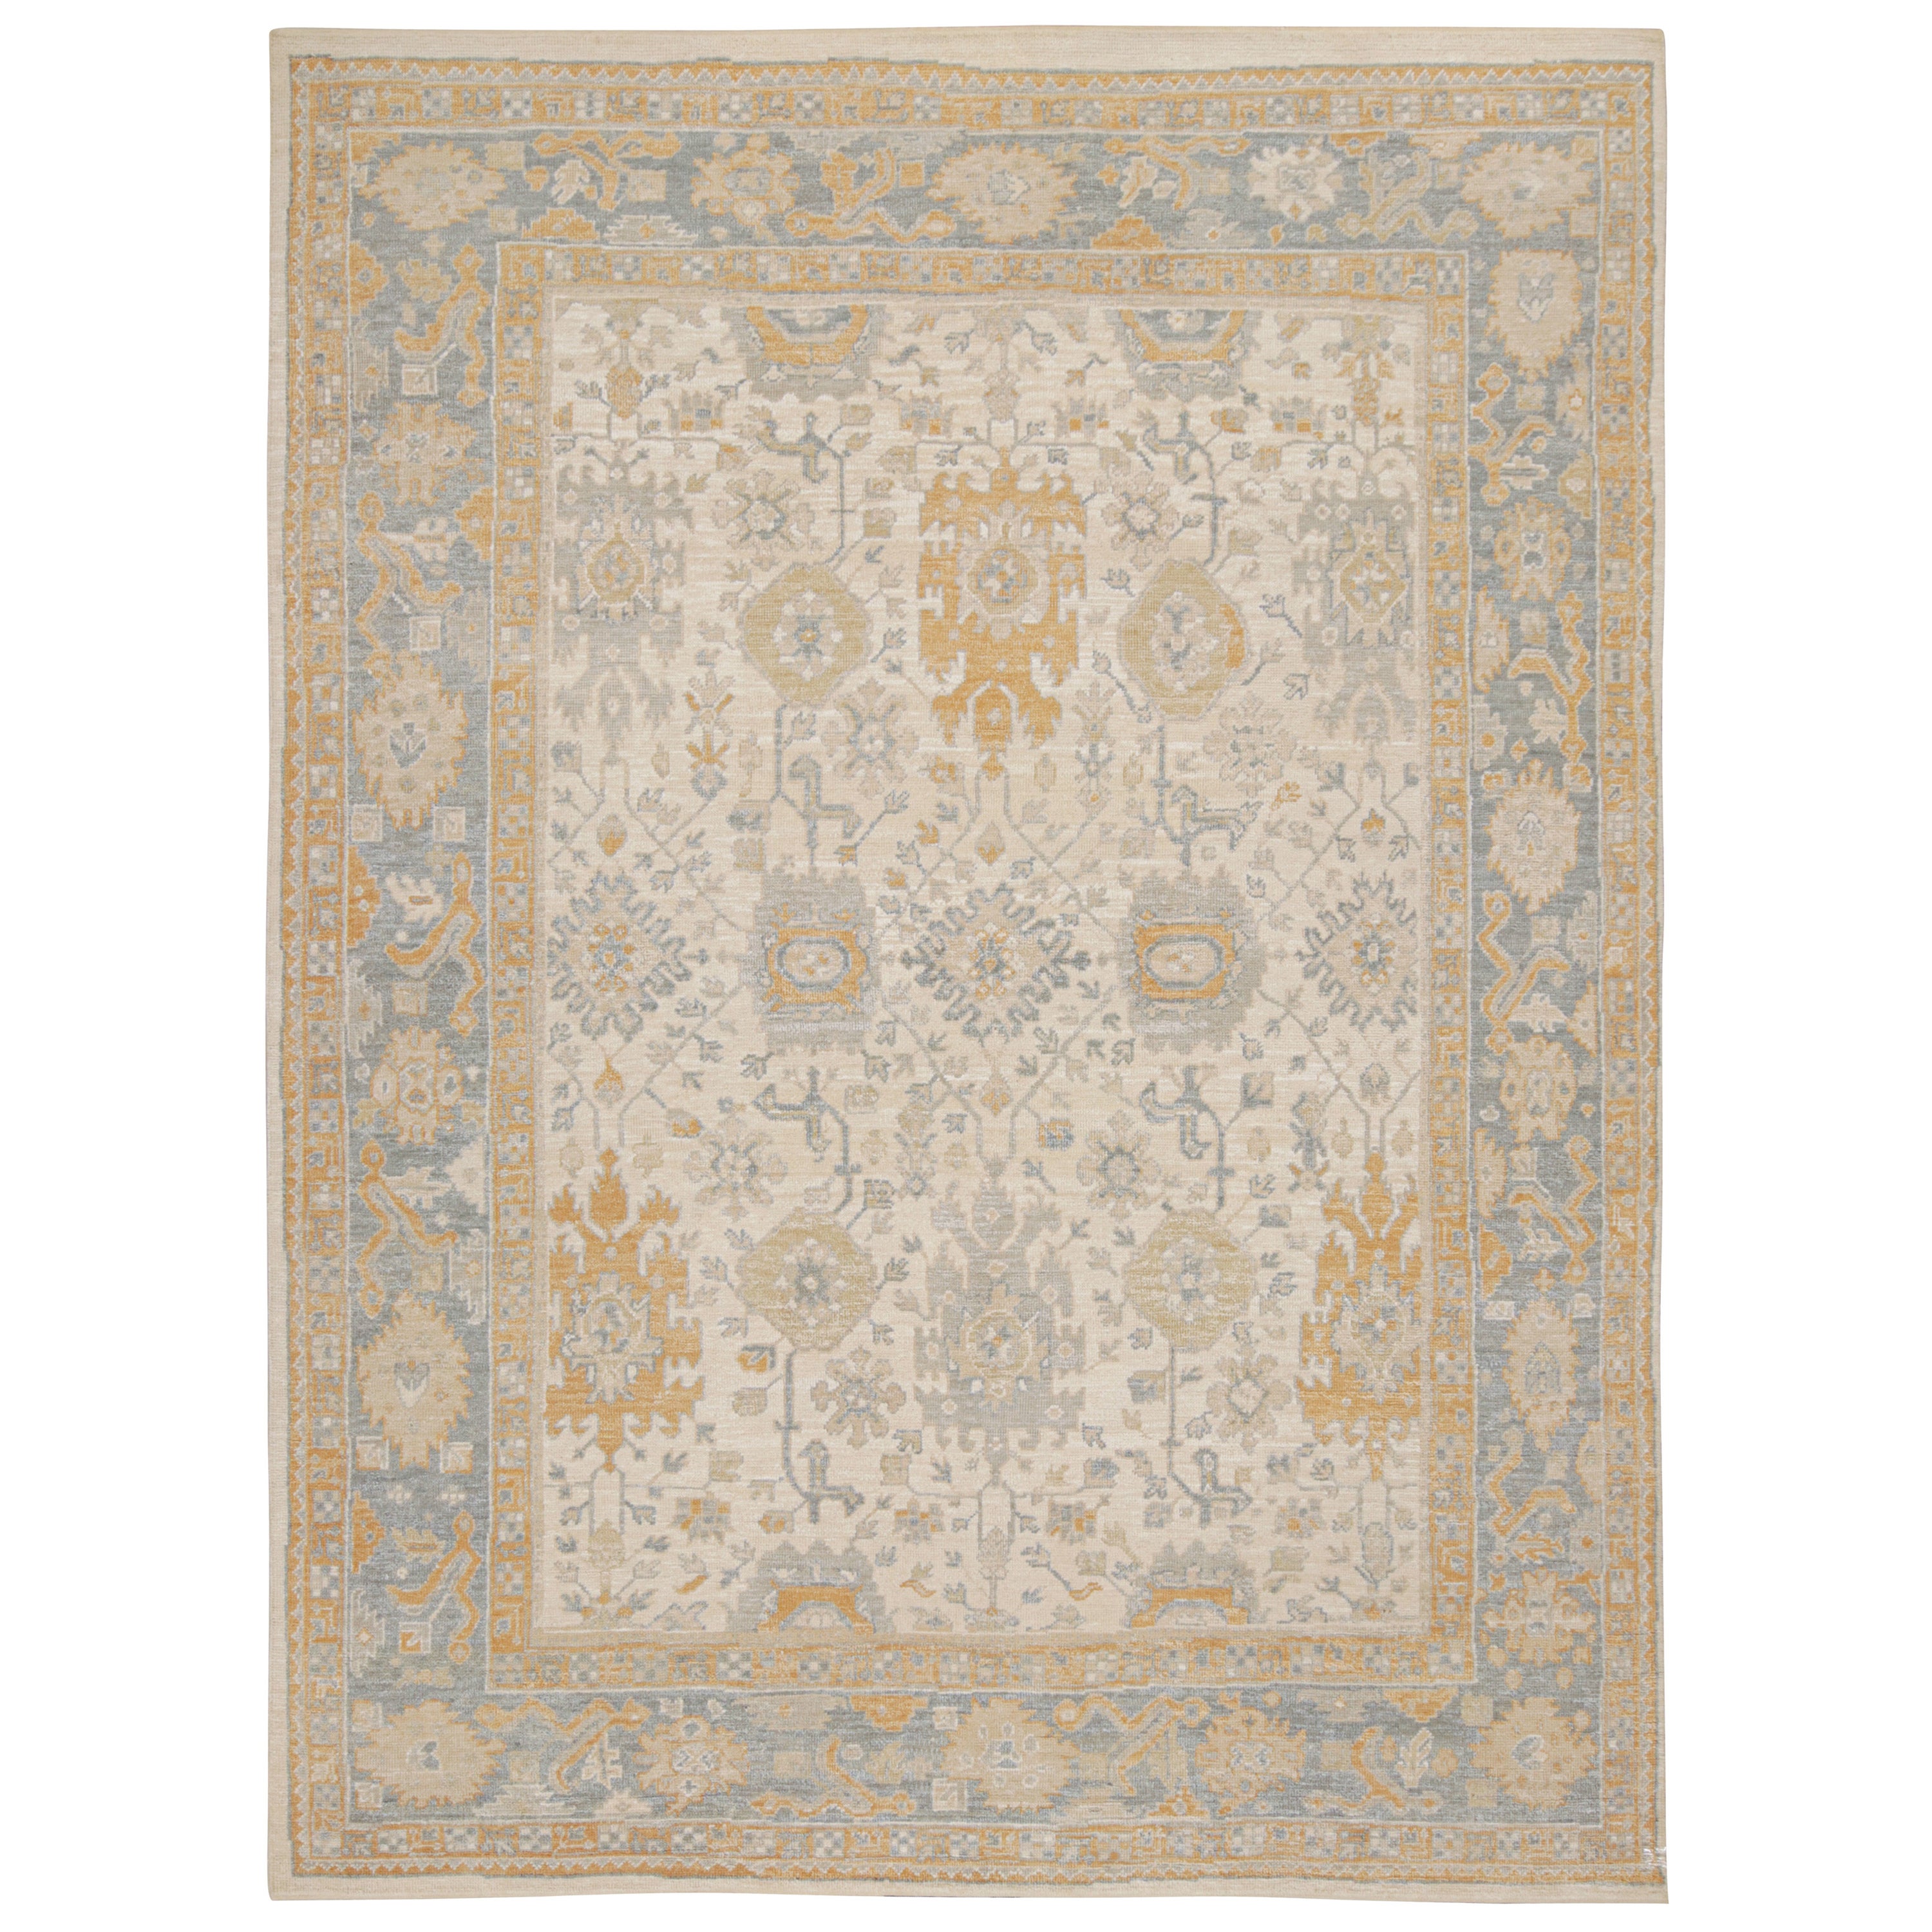 Rug & Kilim’s Oushak Style Rug in Beige, Gold and Blue Floral Patterns For Sale